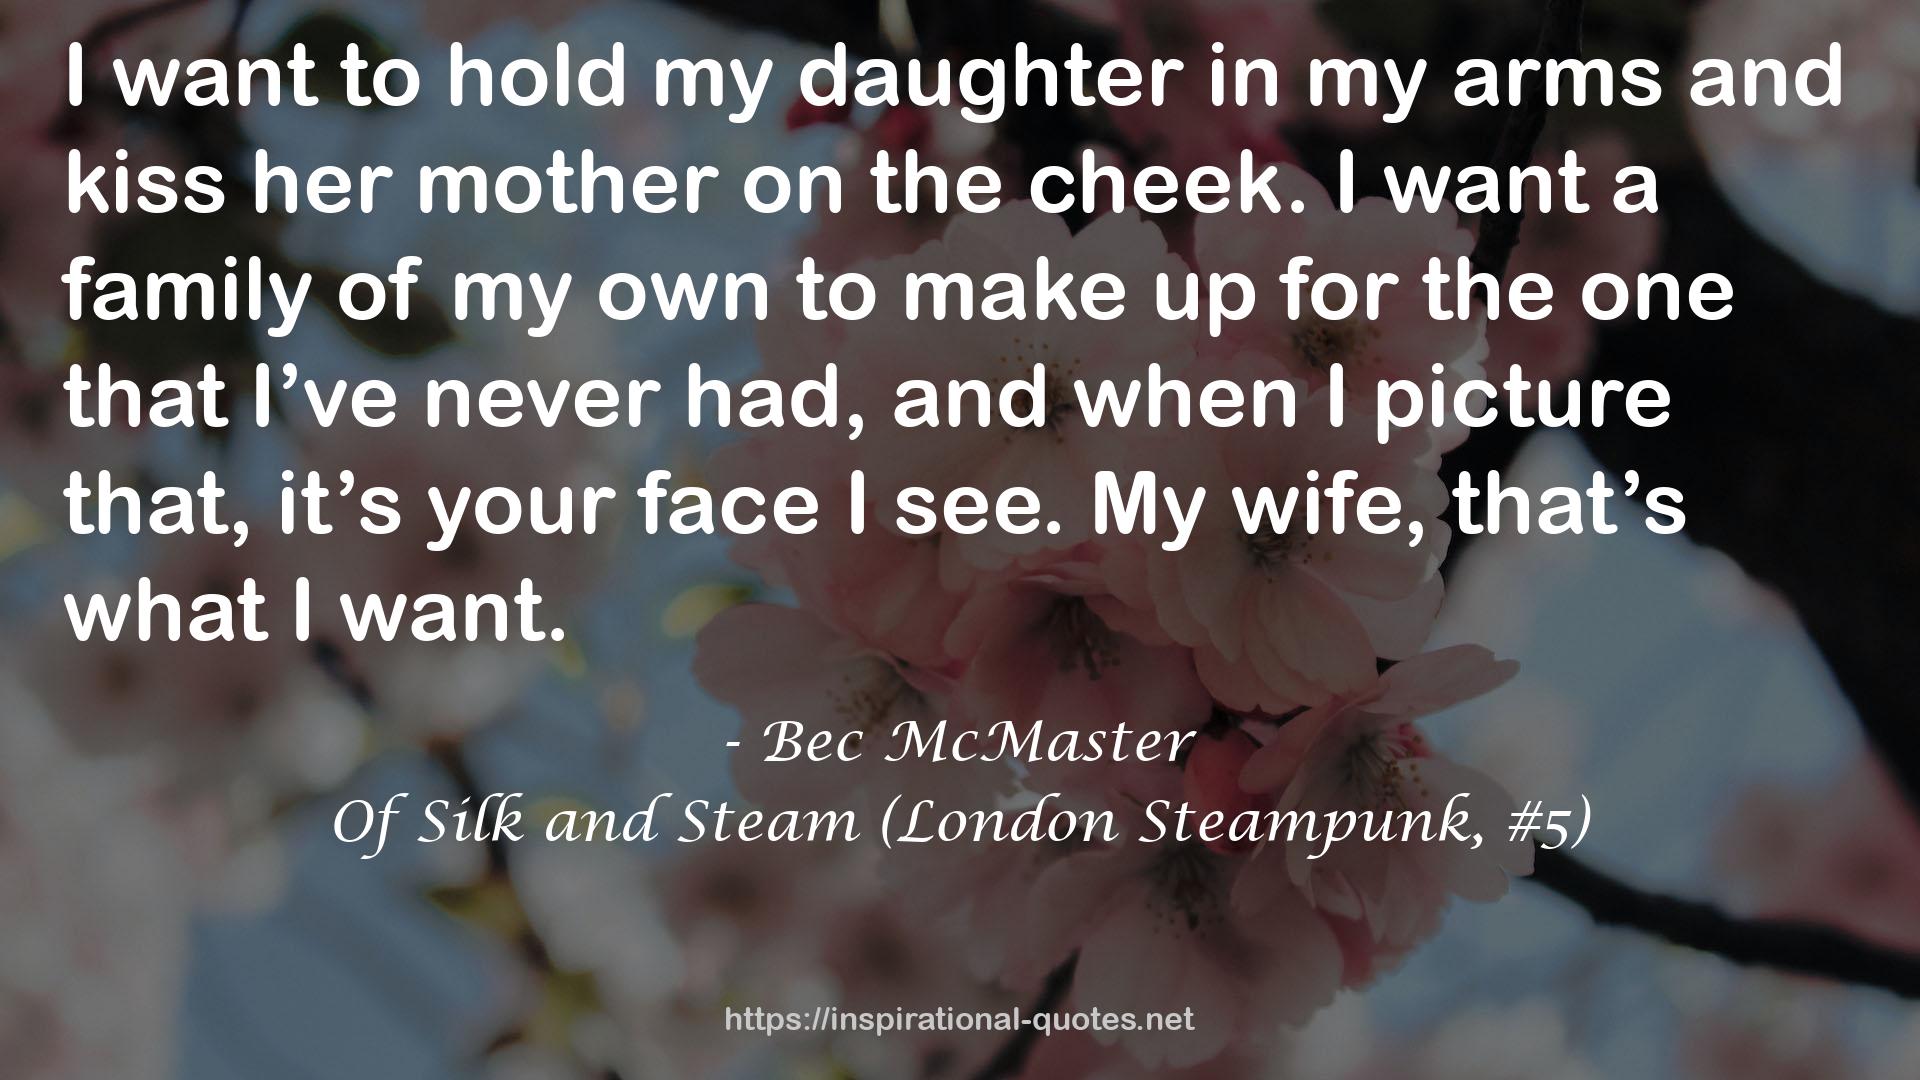 Of Silk and Steam (London Steampunk, #5) QUOTES